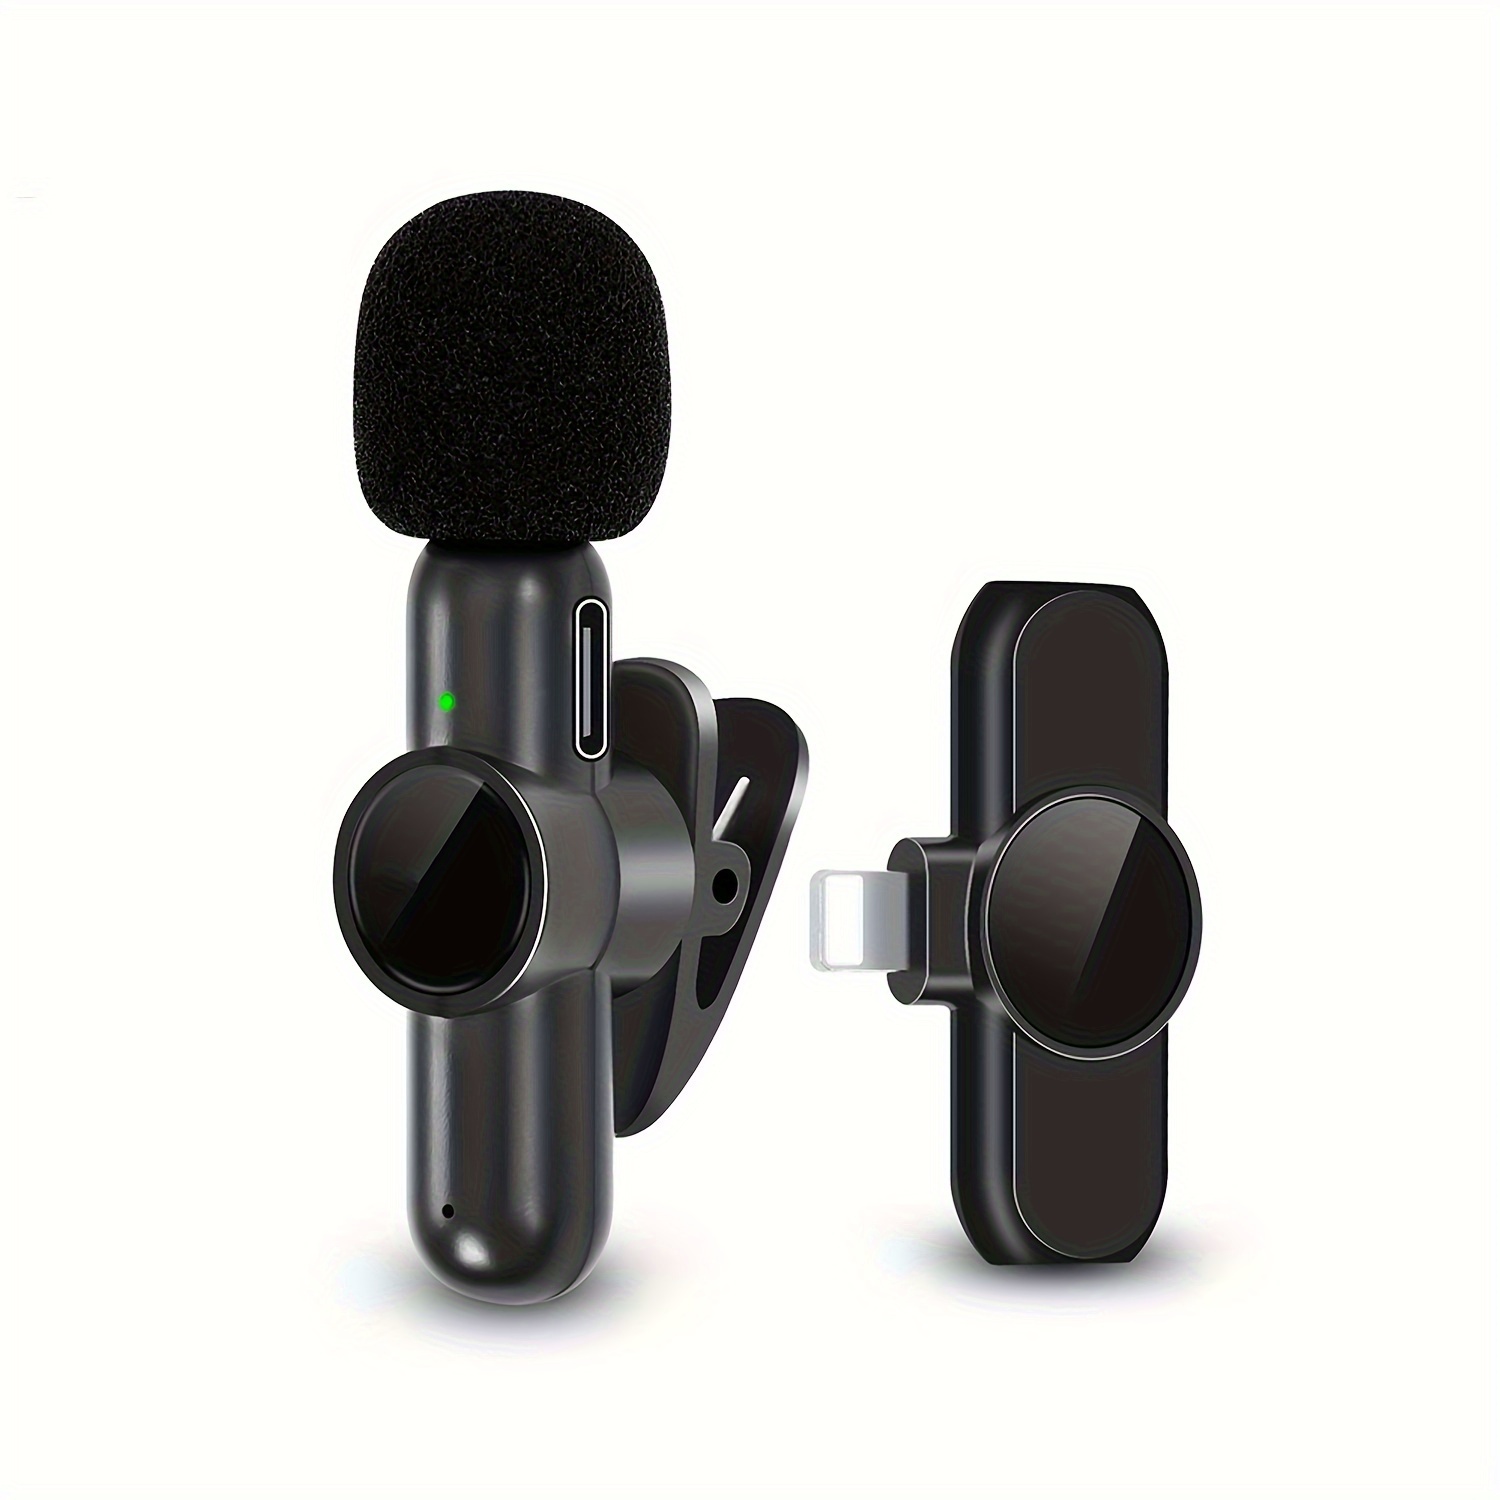 Wireless Lavalier Microphone: Capture Live Performances With